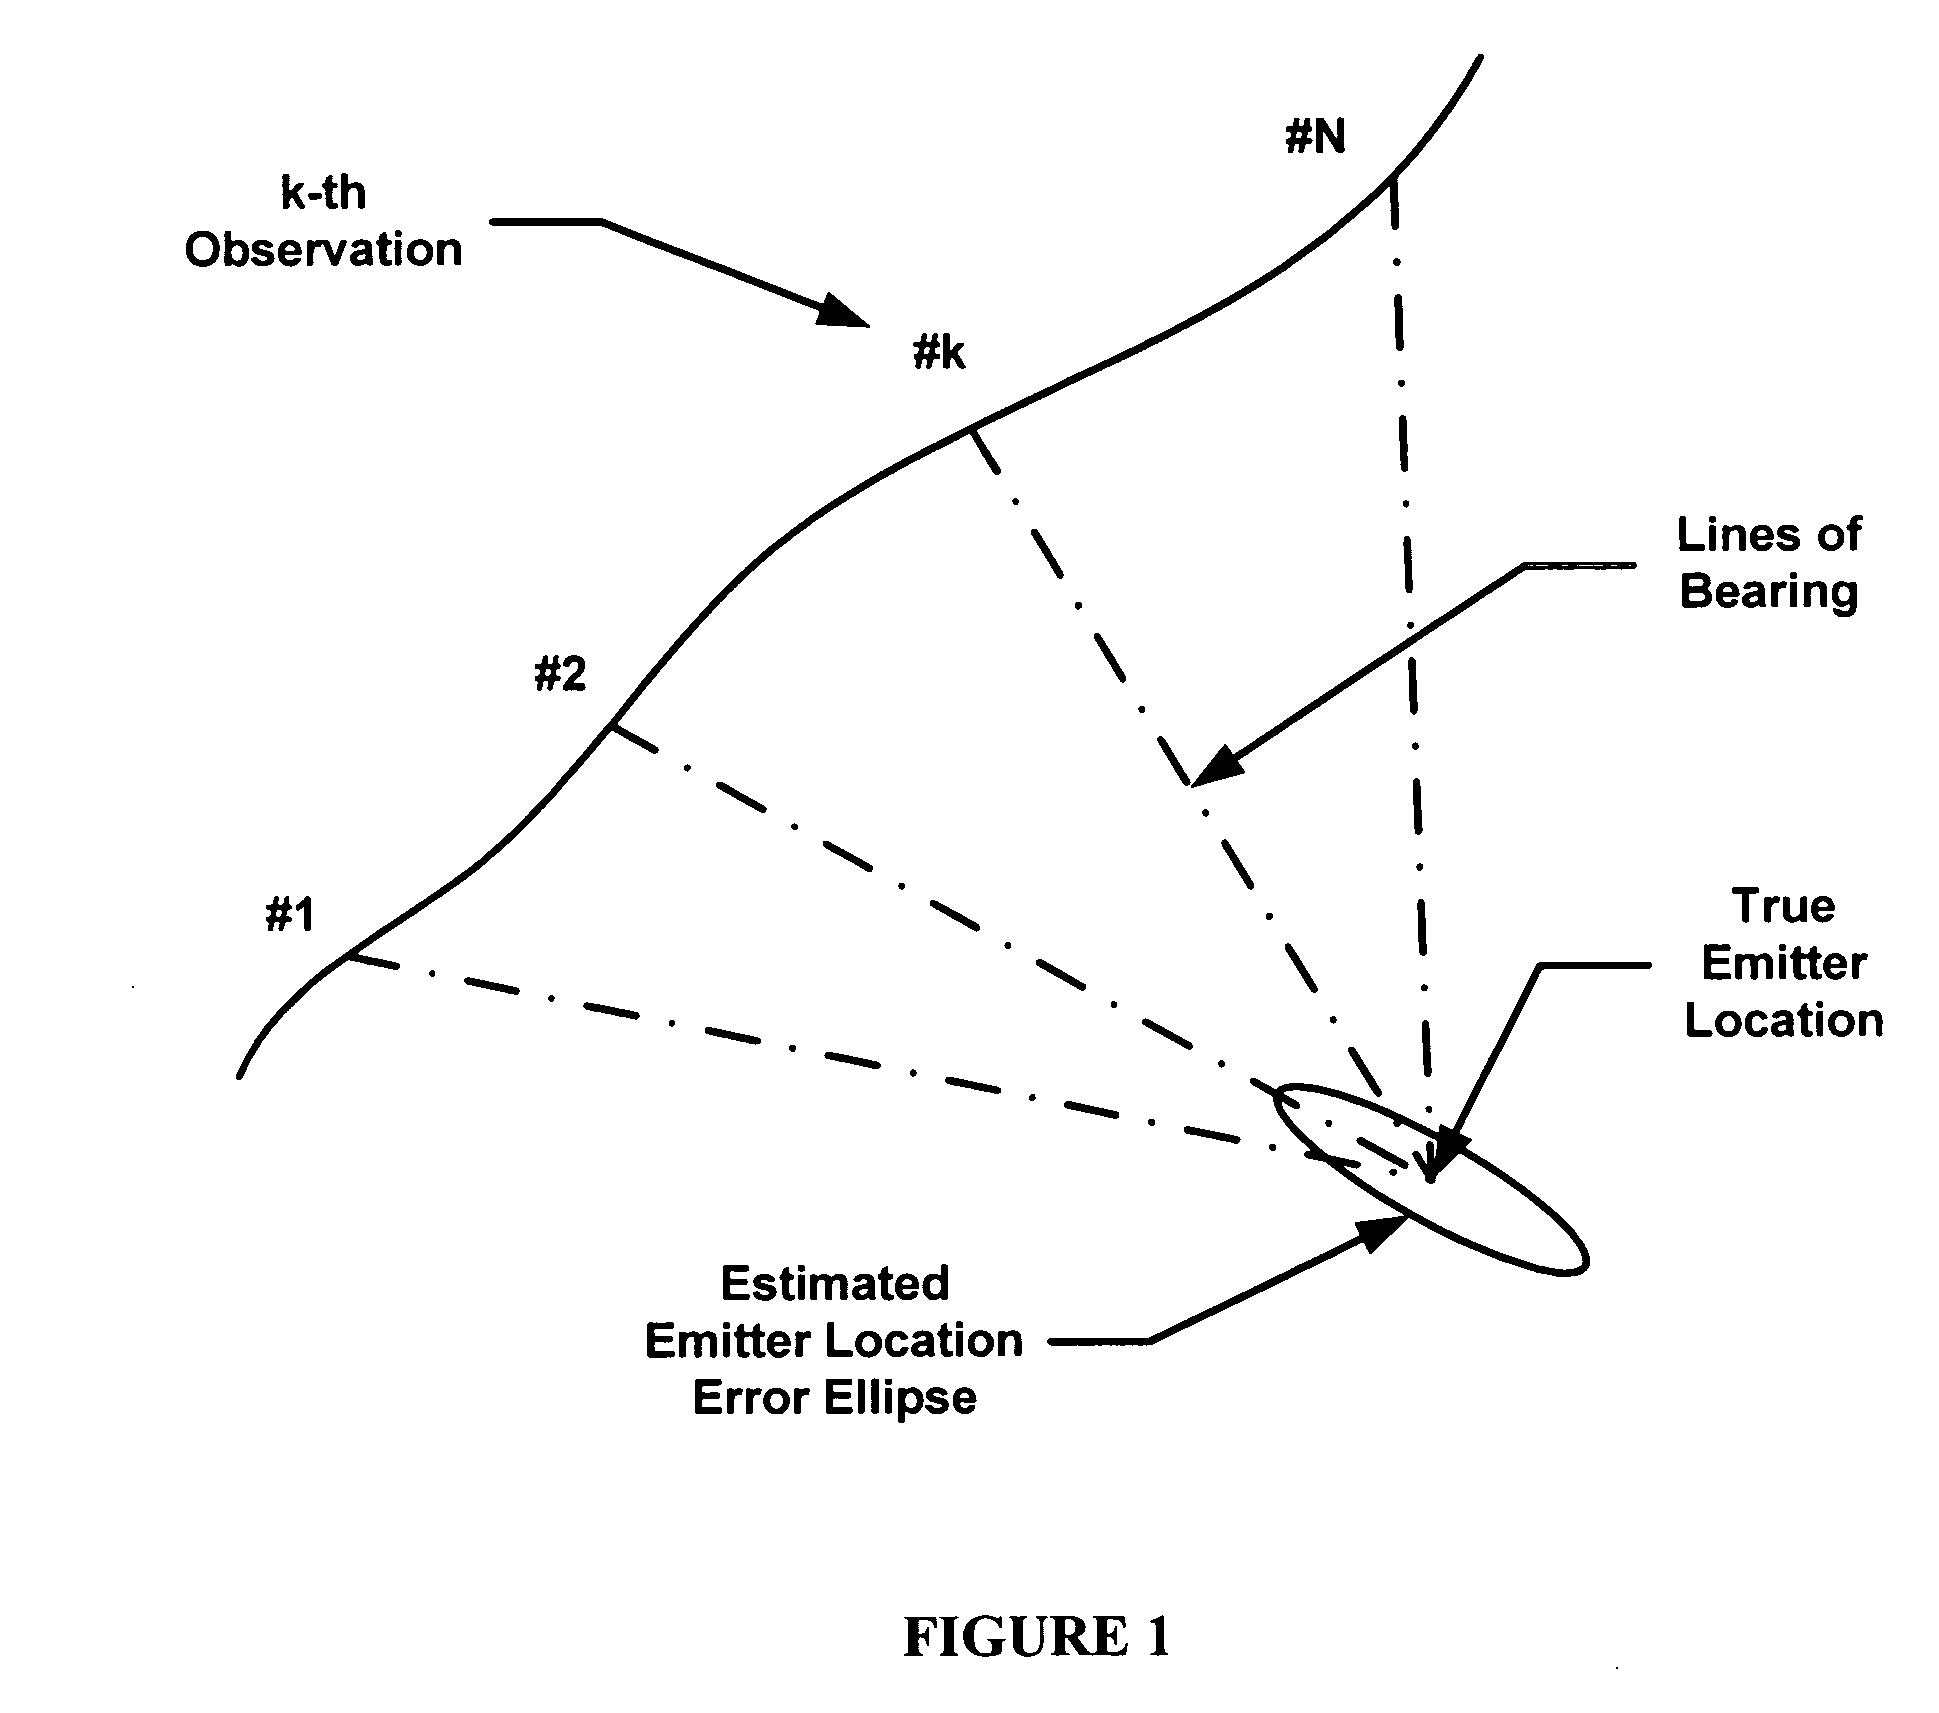 Precision geolocation system and method using a long baseline interferometer antenna system